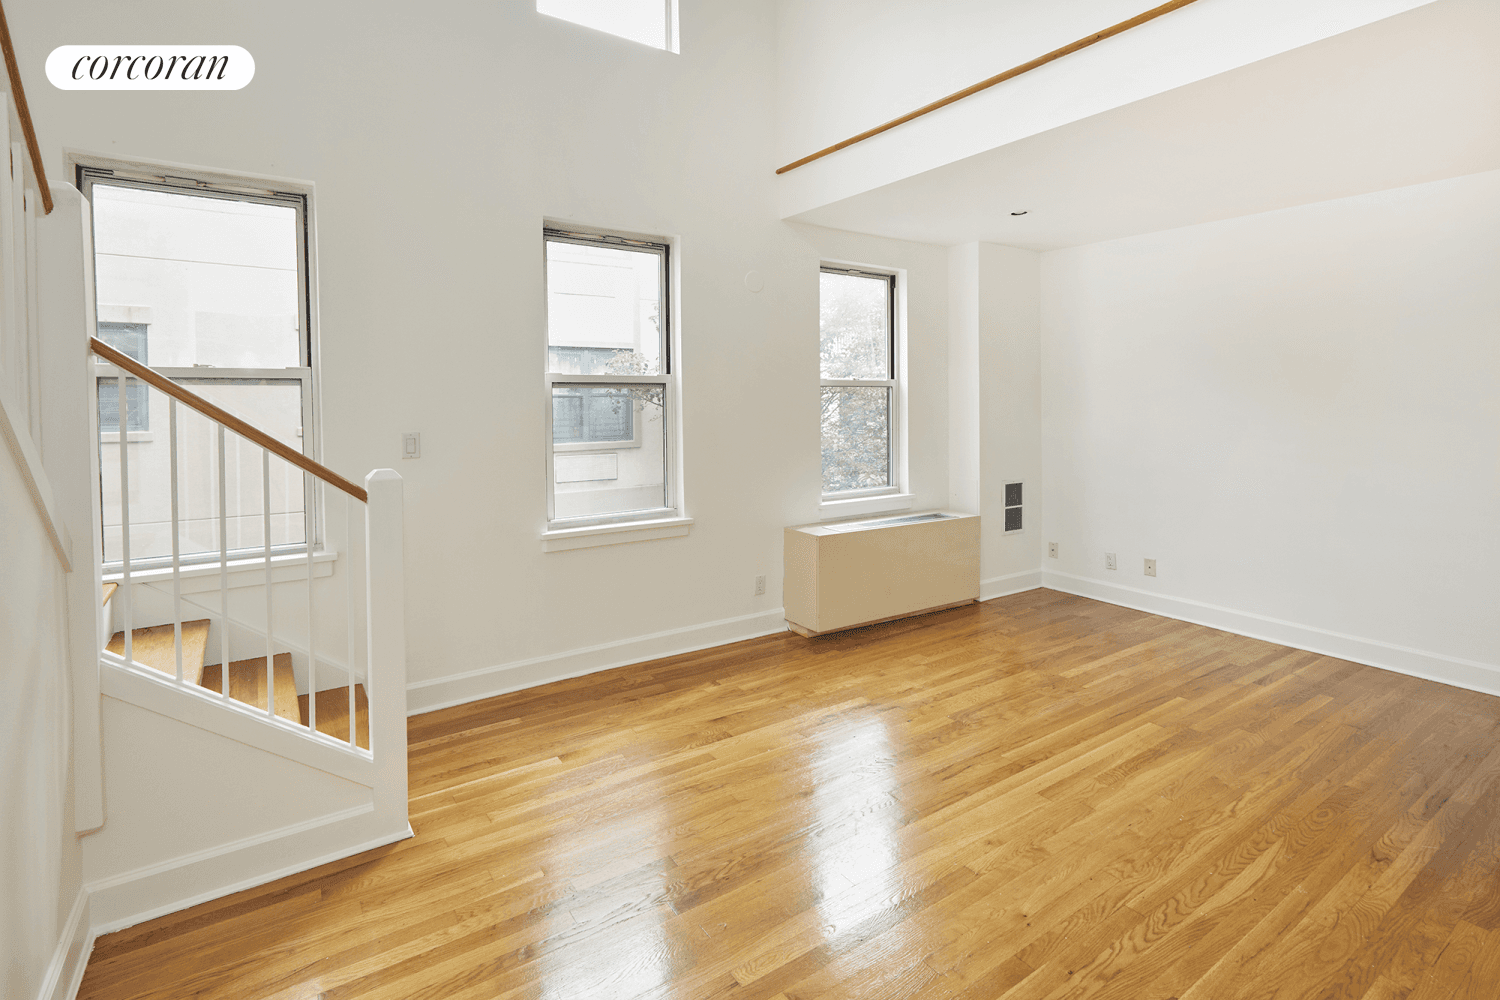 Welcome to this 2 Br Flex room, duplex apartment located in the highly desired neighborhood of Boerum Hill.